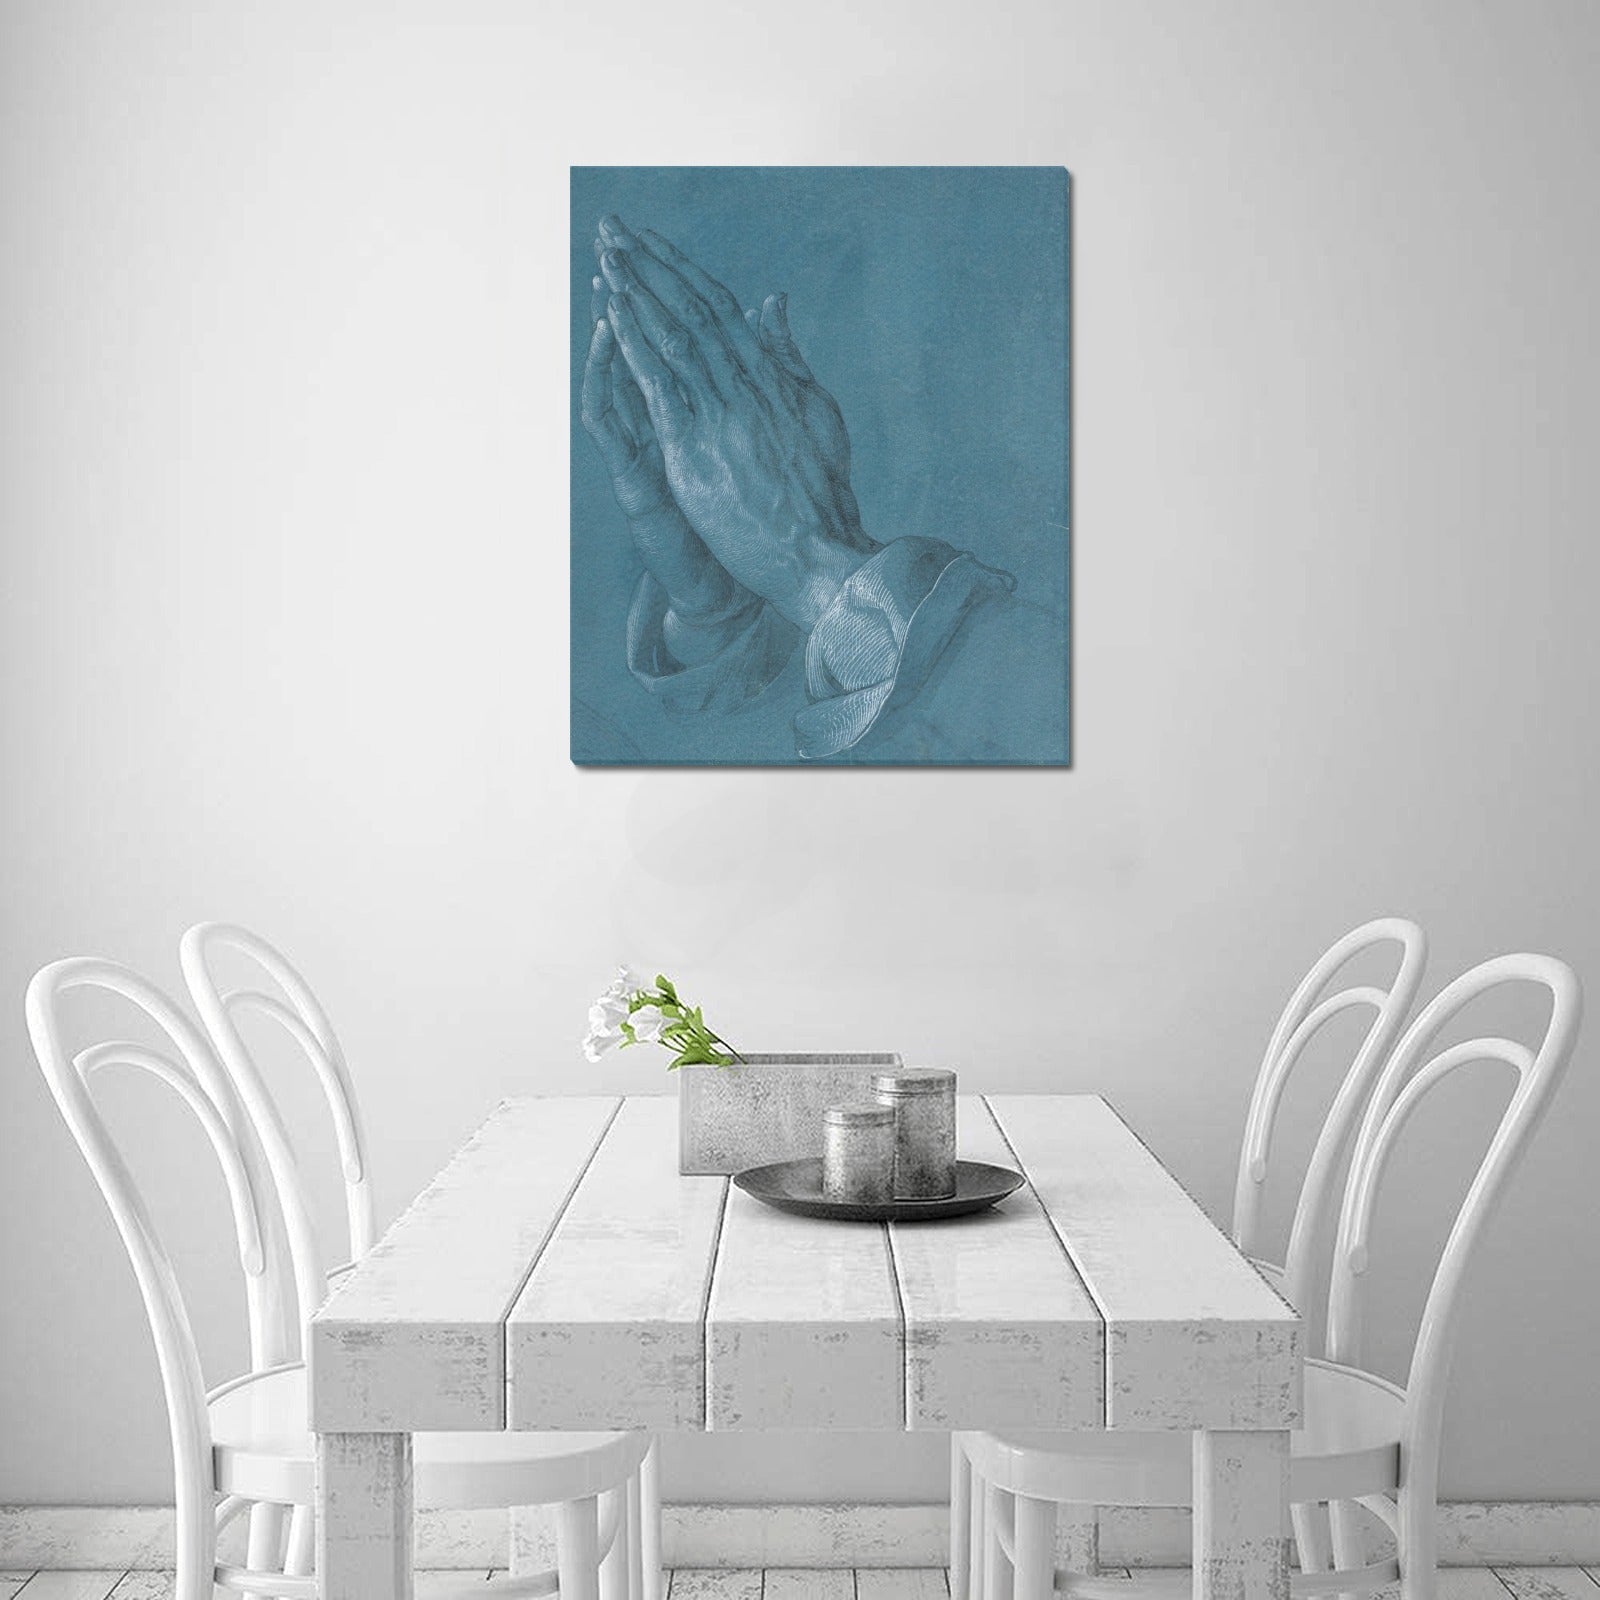 a painting of a praying hand on a wall above a table